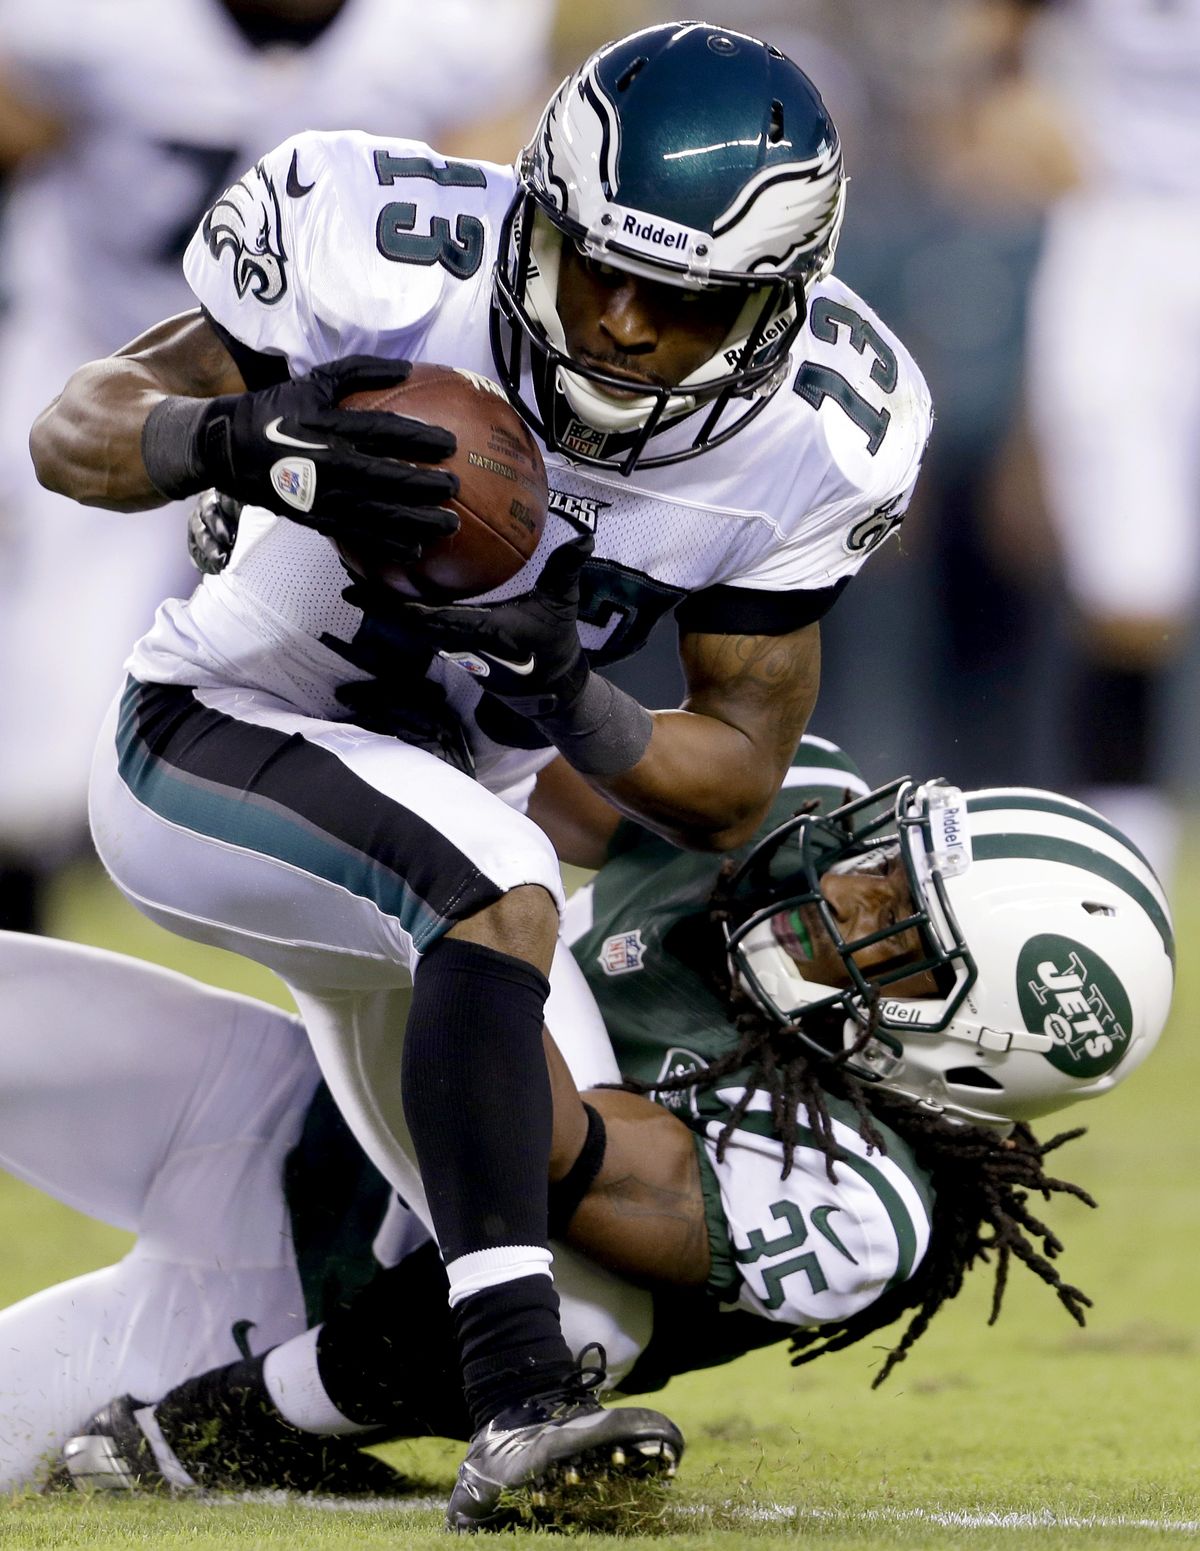 Former EWU standout Isaiah Trufant of New York Jets tackles Philadelphia wide receiver Damaris Johnson. He’ll face brother Marcus and the Seahawks in Seattle on Sunday. (Associated Press)